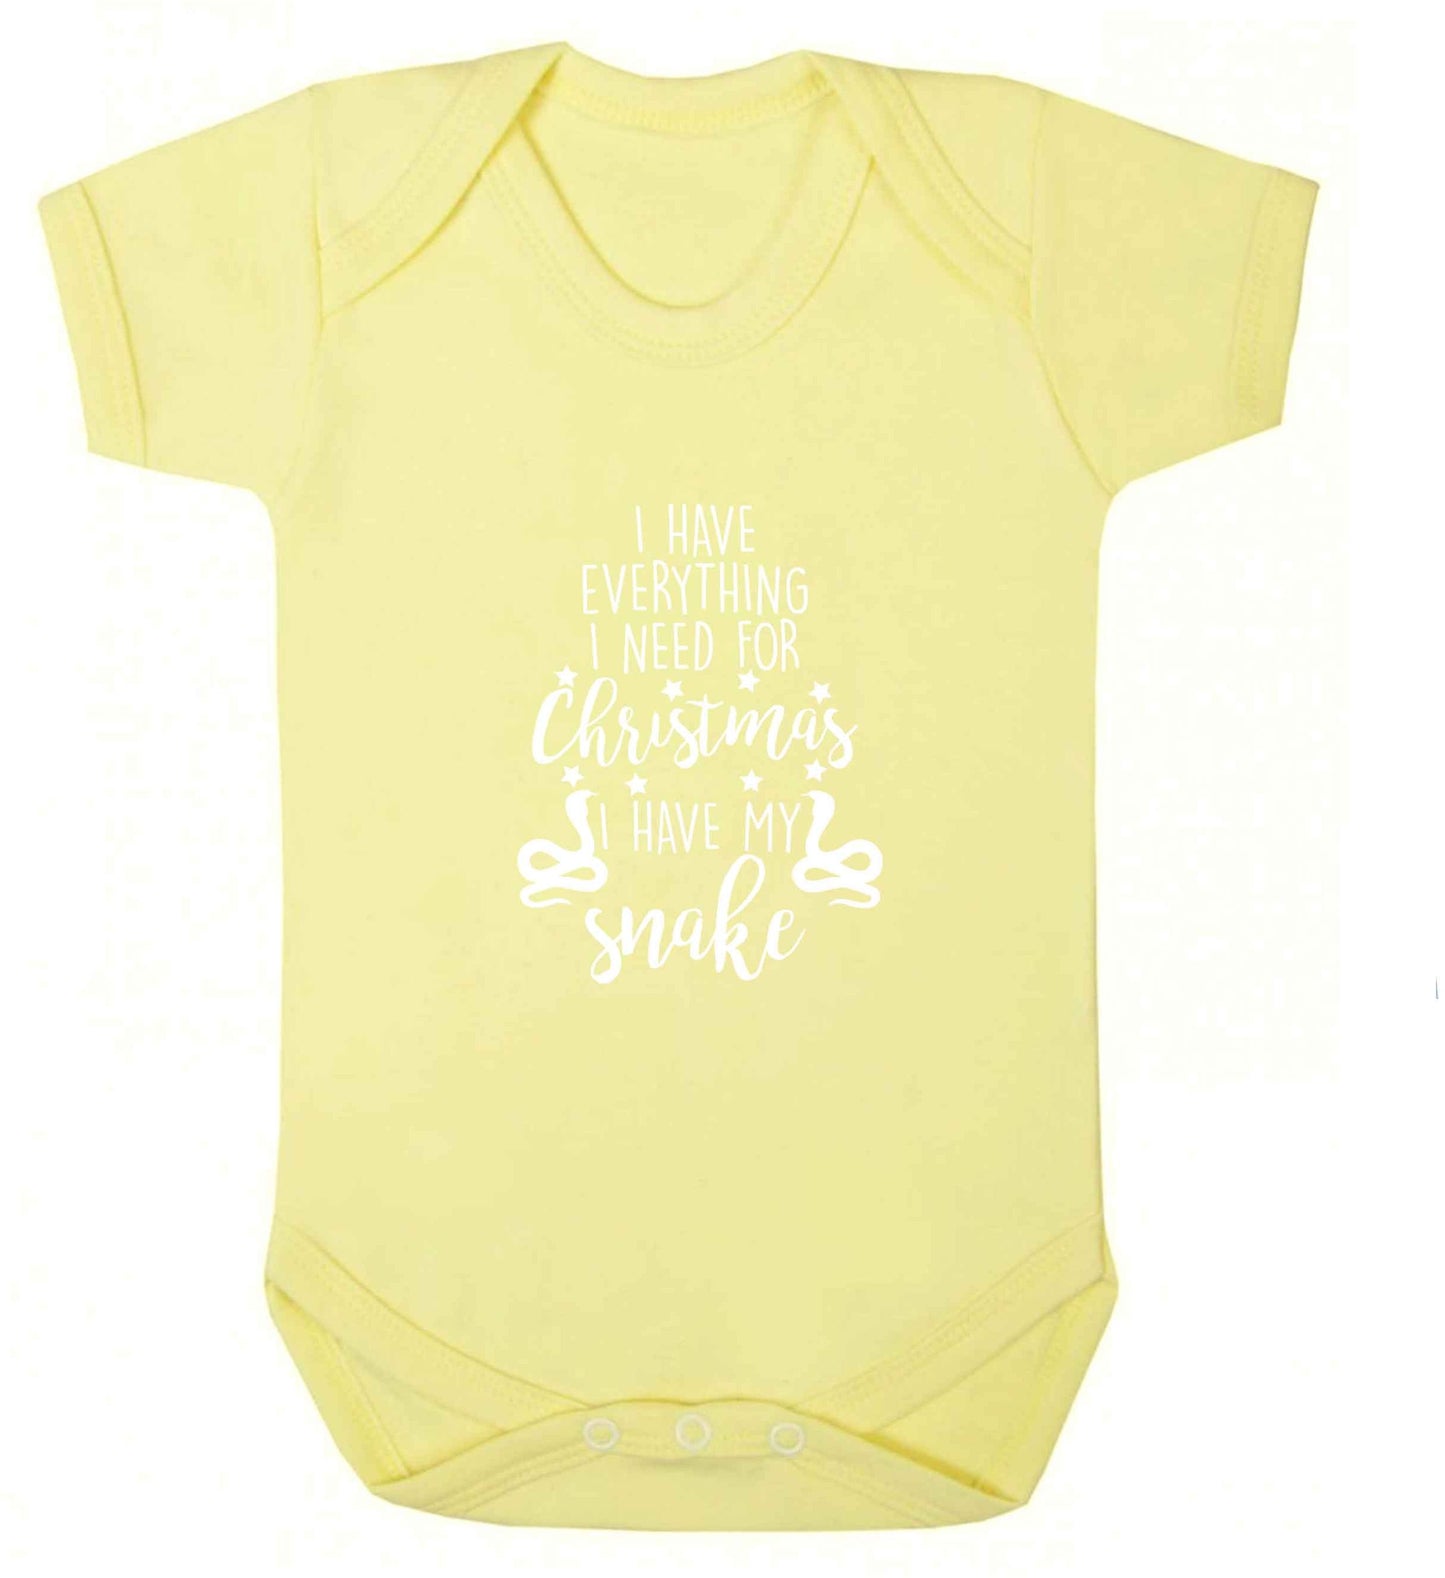 I have everything I need for Christmas I have my snake baby vest pale yellow 18-24 months